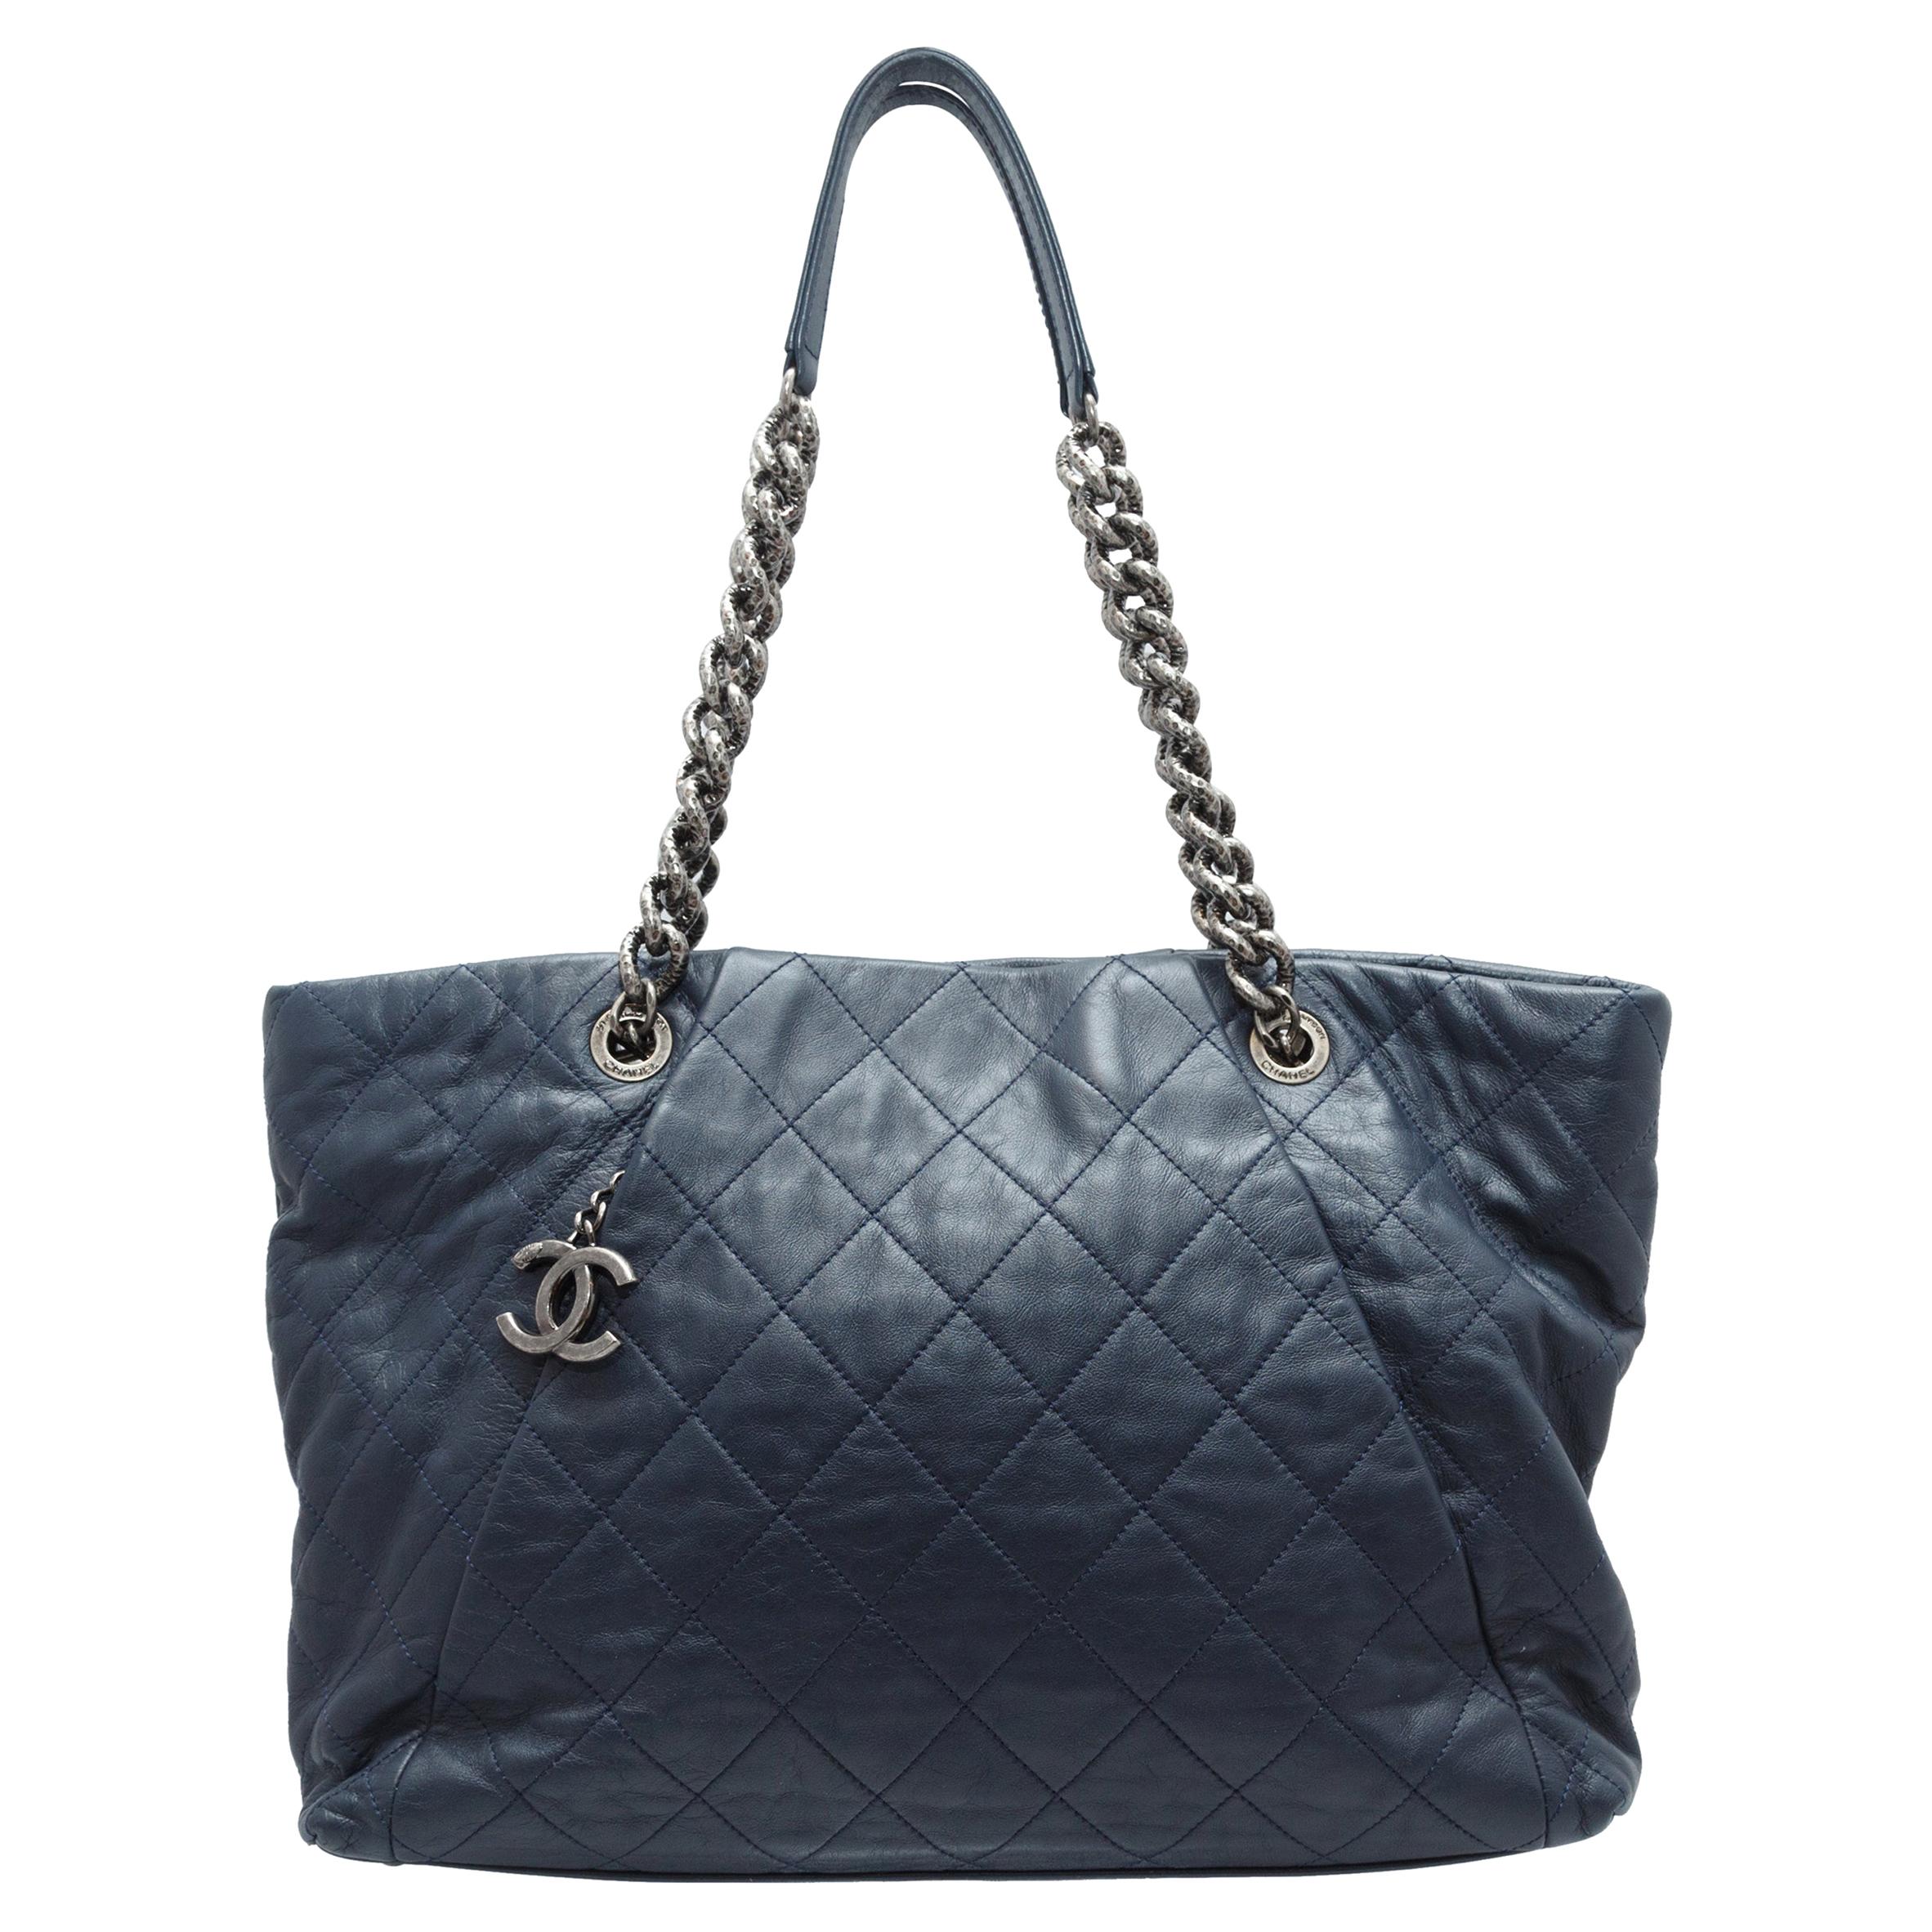 Chanel Navy Chic Quilted Tote Bag